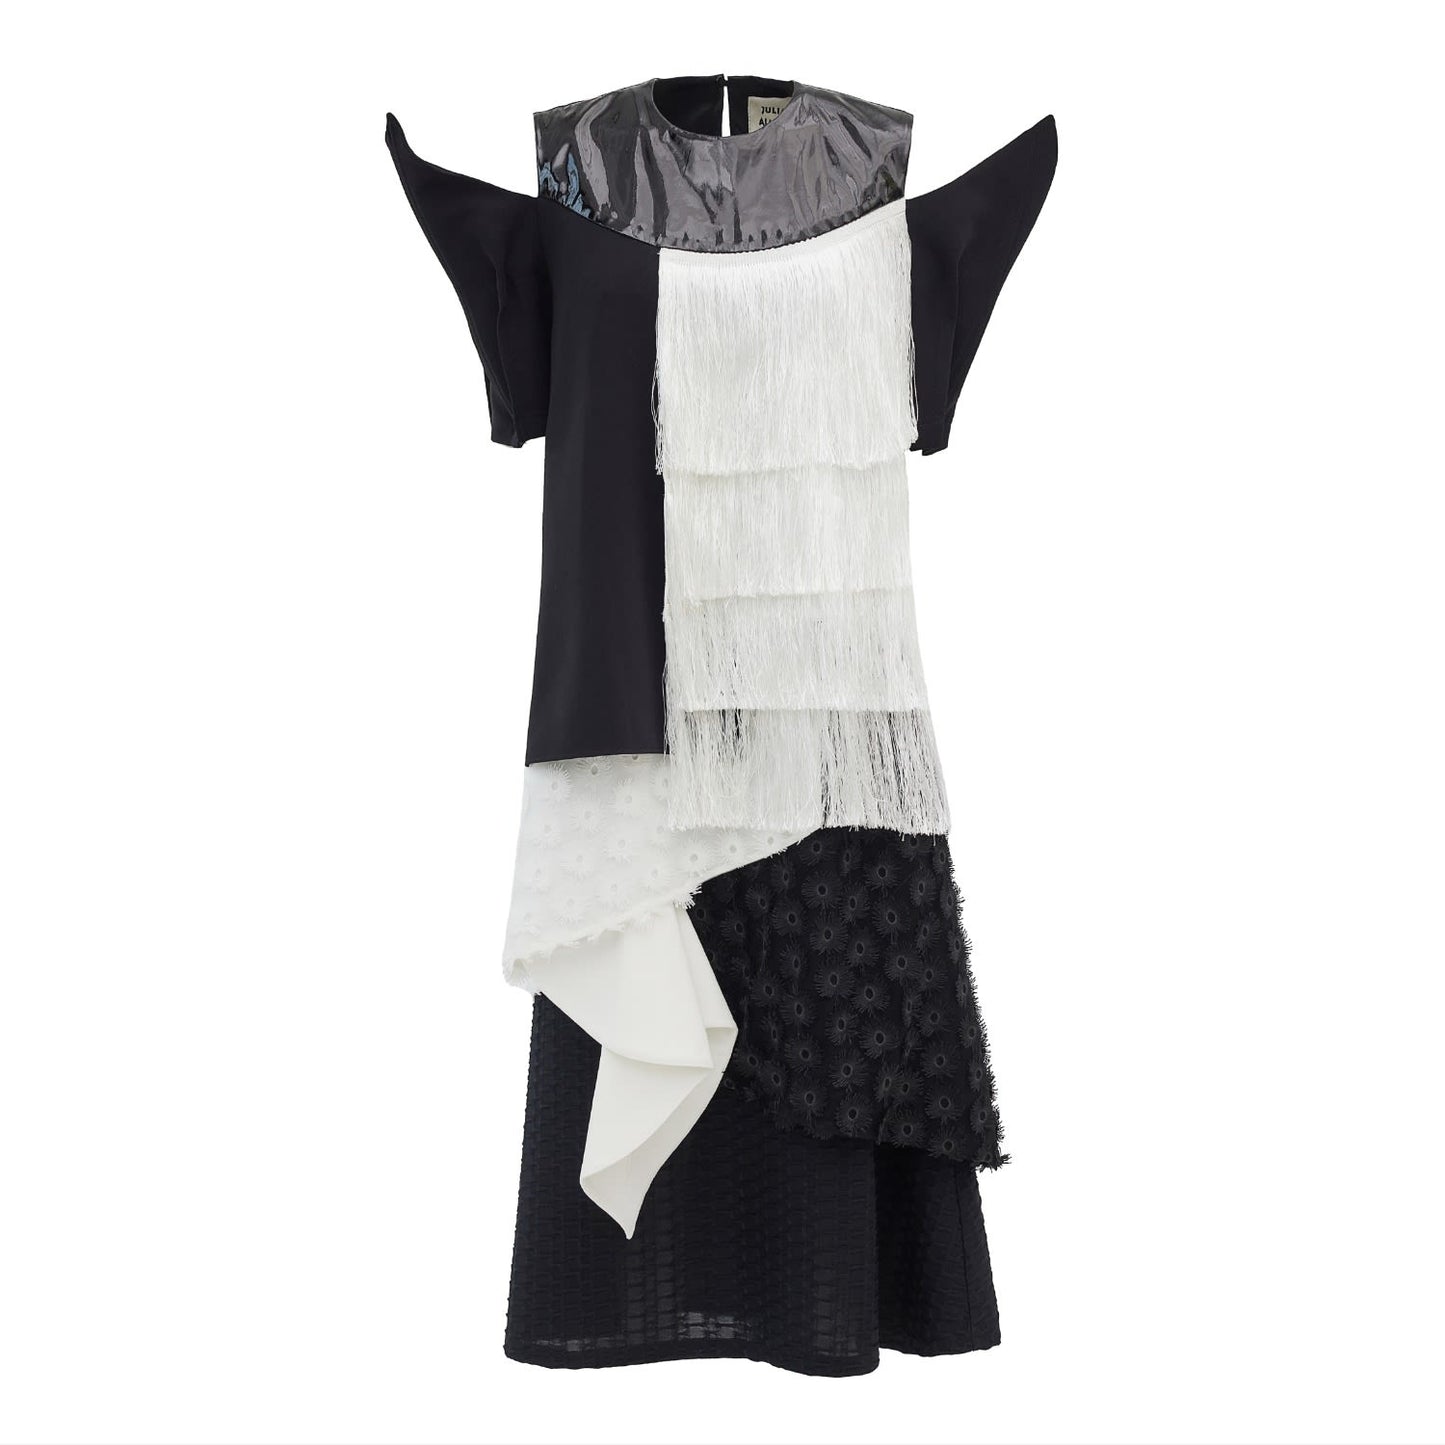 EXCLUSIVE Multi-Layered Dress With Intricate Details Black White